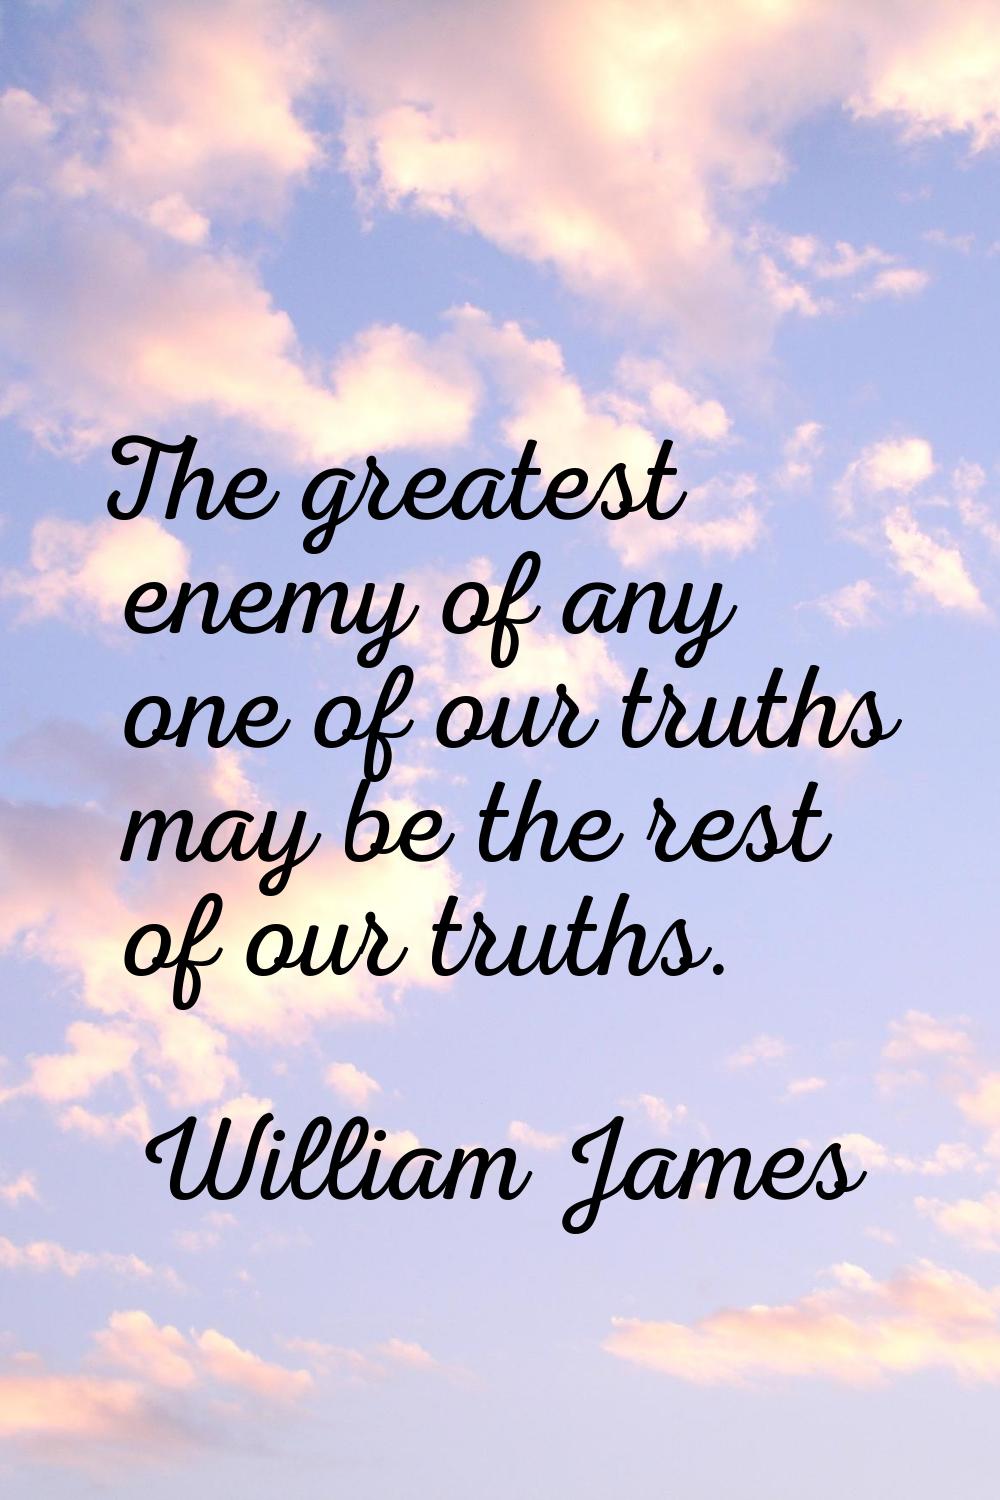 The greatest enemy of any one of our truths may be the rest of our truths.